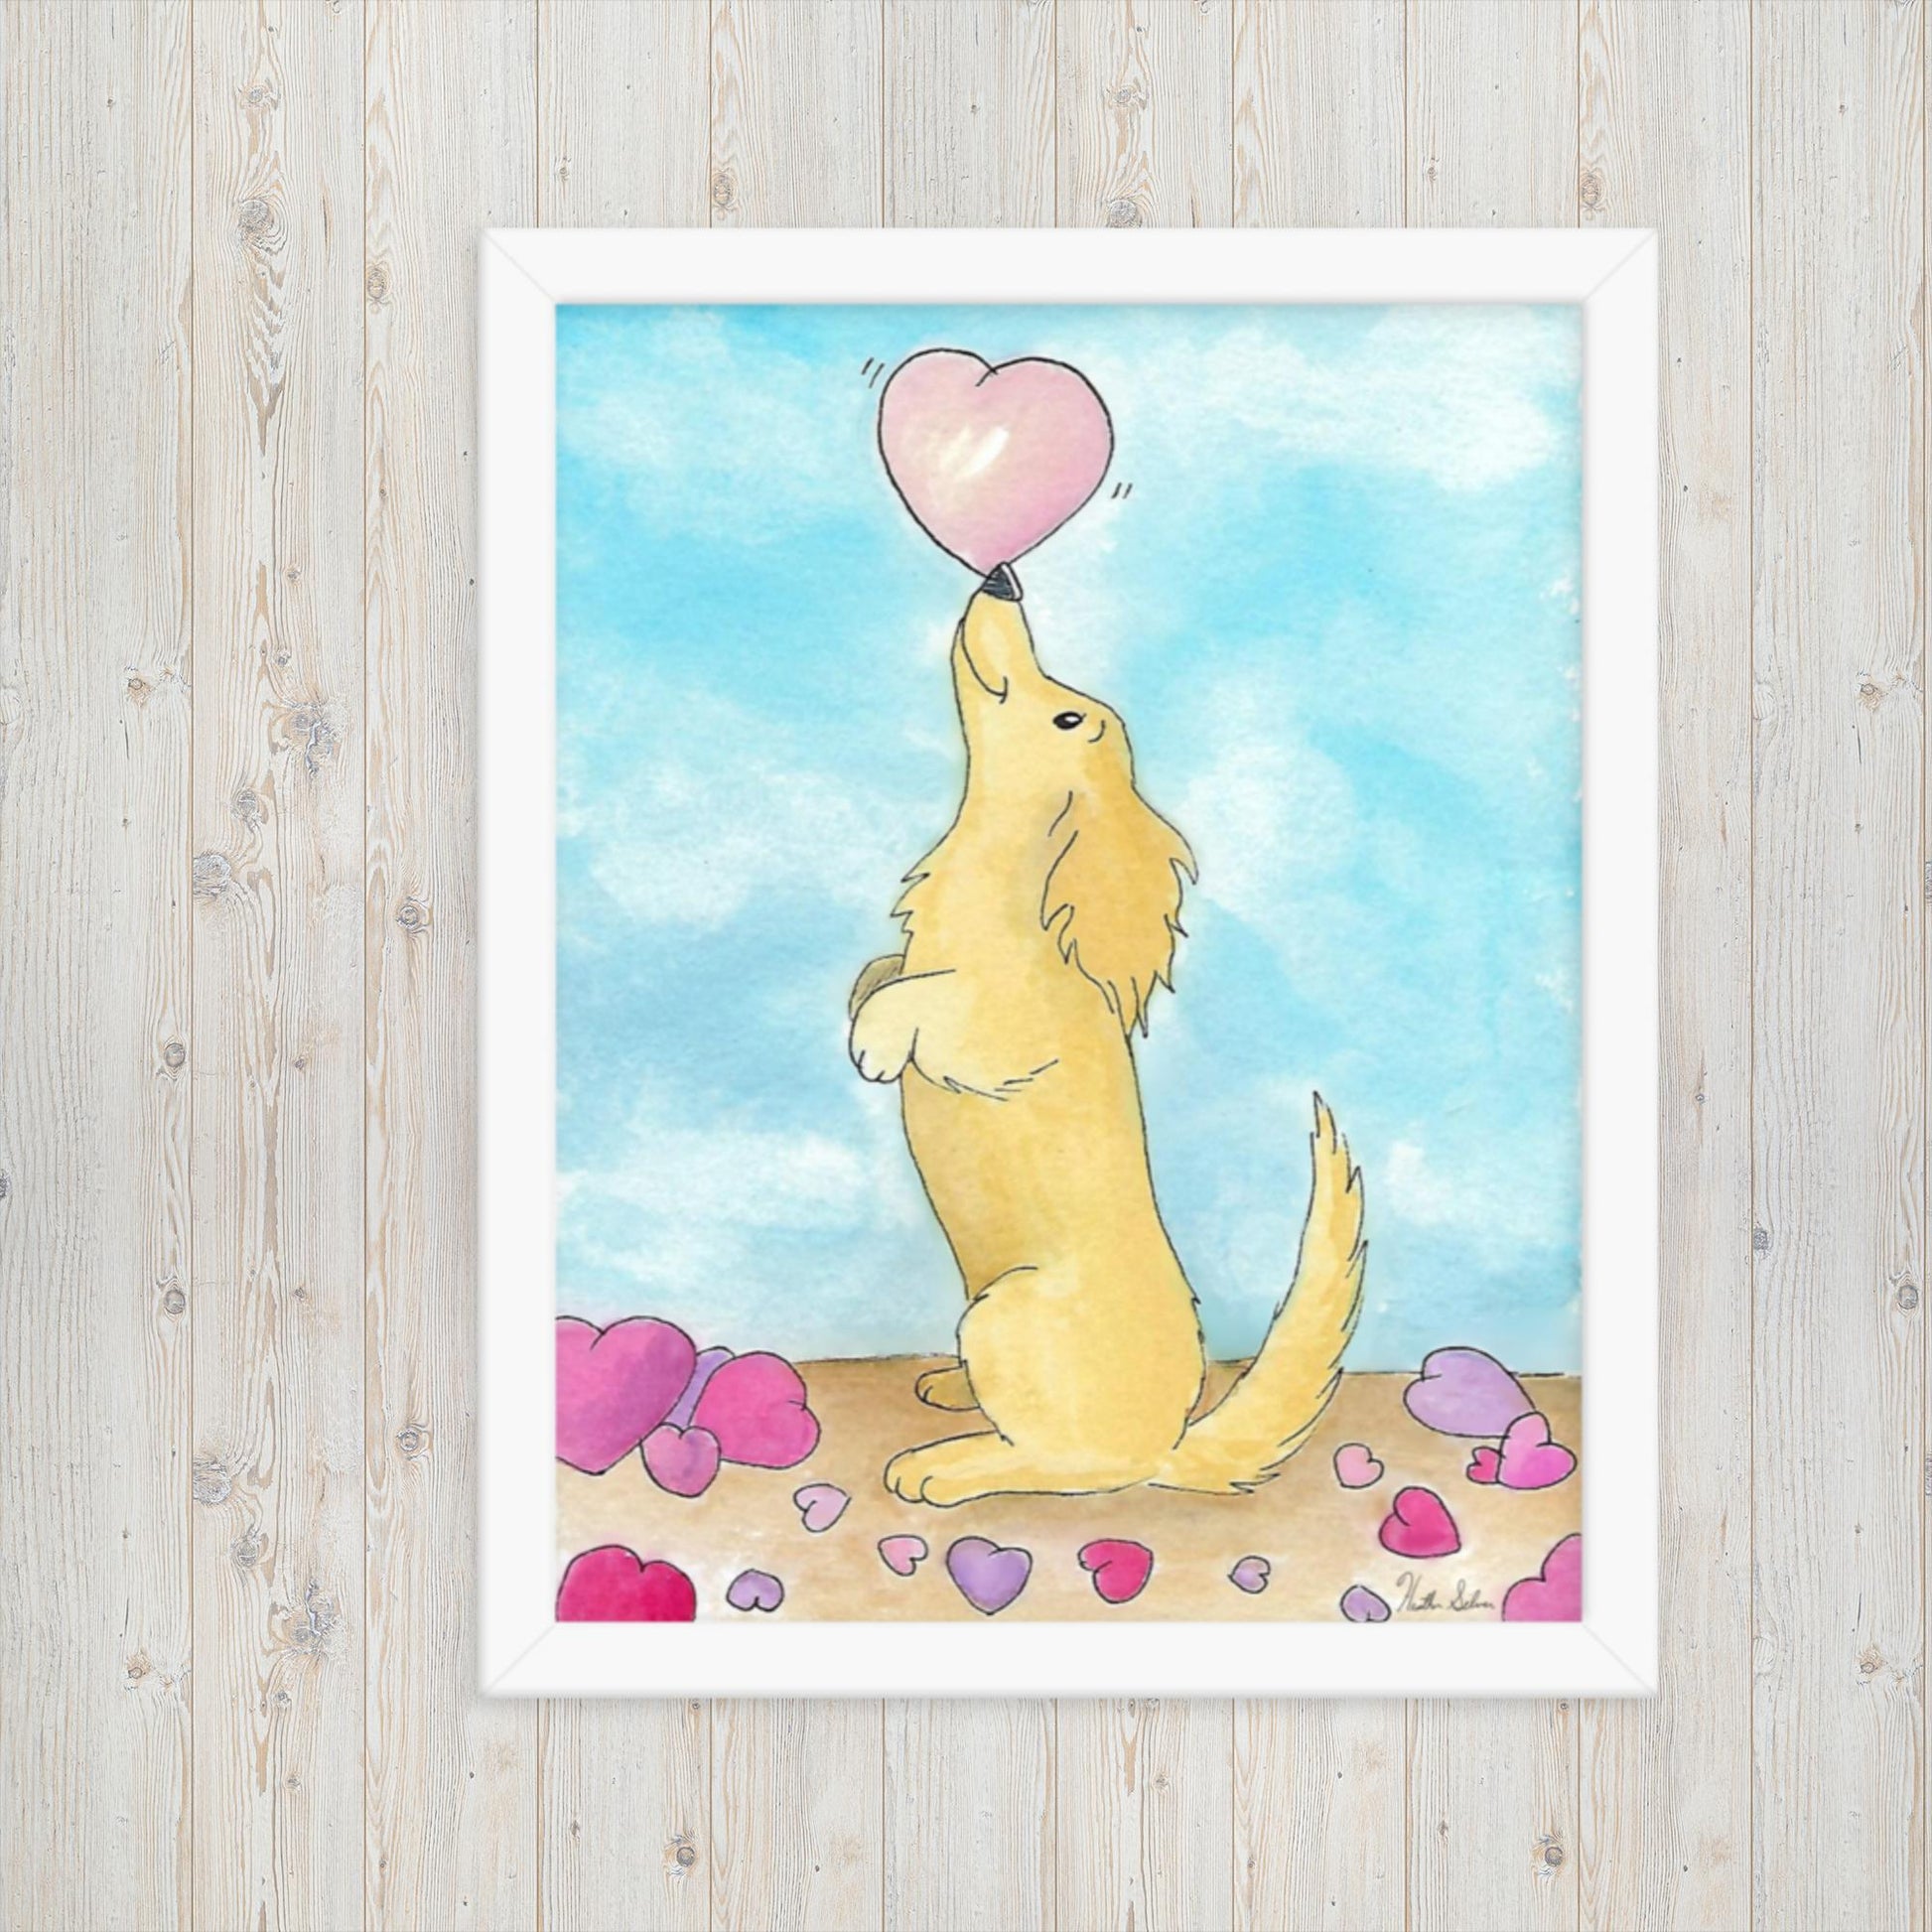 Framed watercolor art print entitled Puppy Love.  11 by 14 inch print in white ayous wood frame. Has acrylite cover to protect the art print. Hanging hardware included. Shown on wood panel wall.